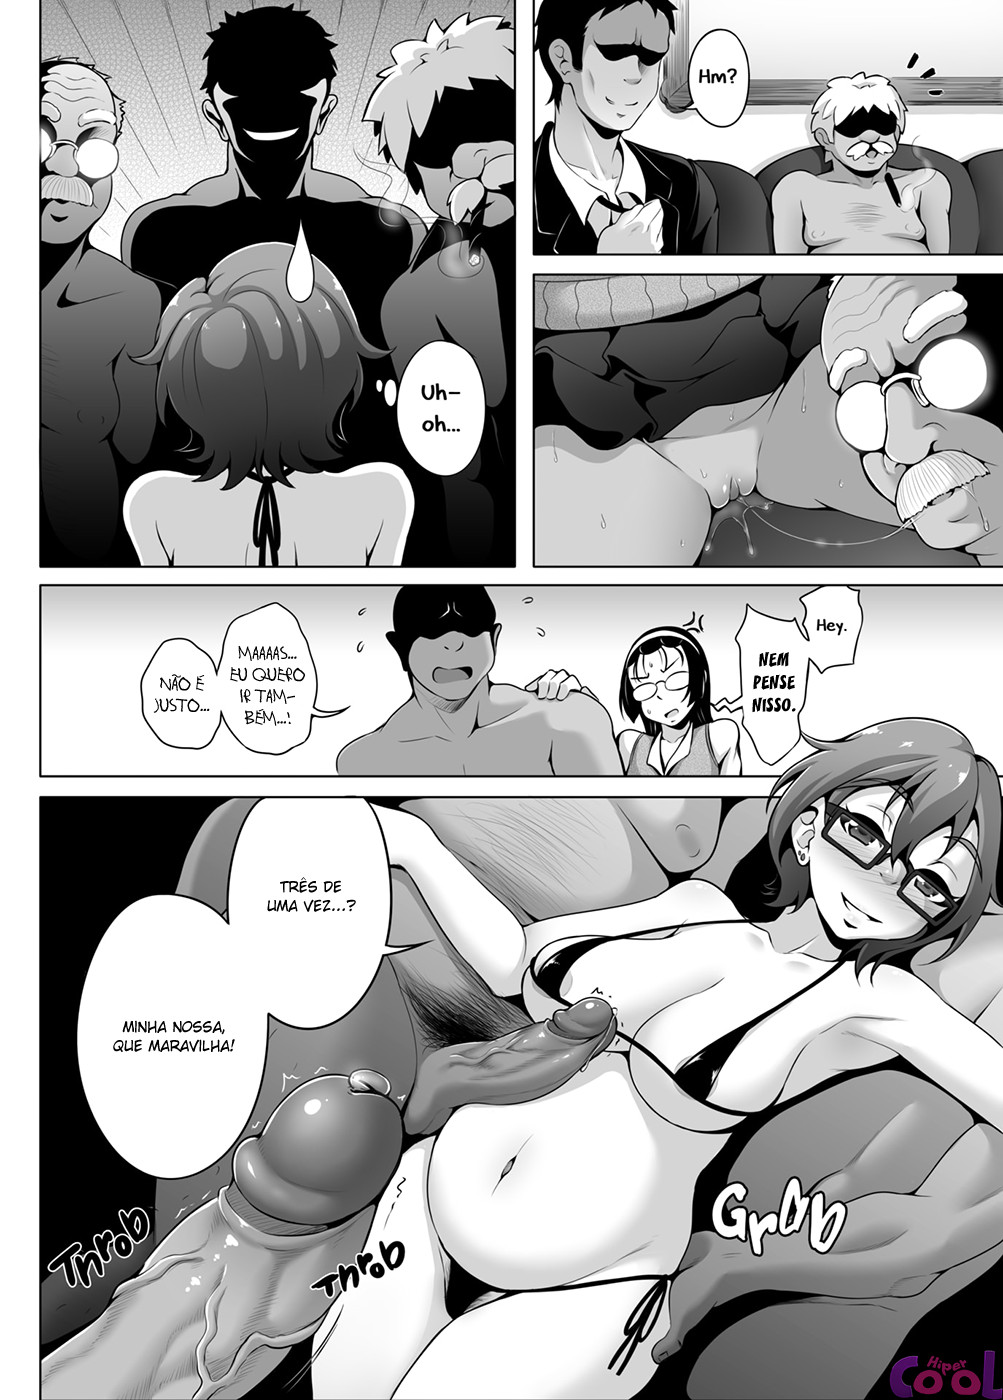 shady-dealings-chapter-08-page-06.jpg